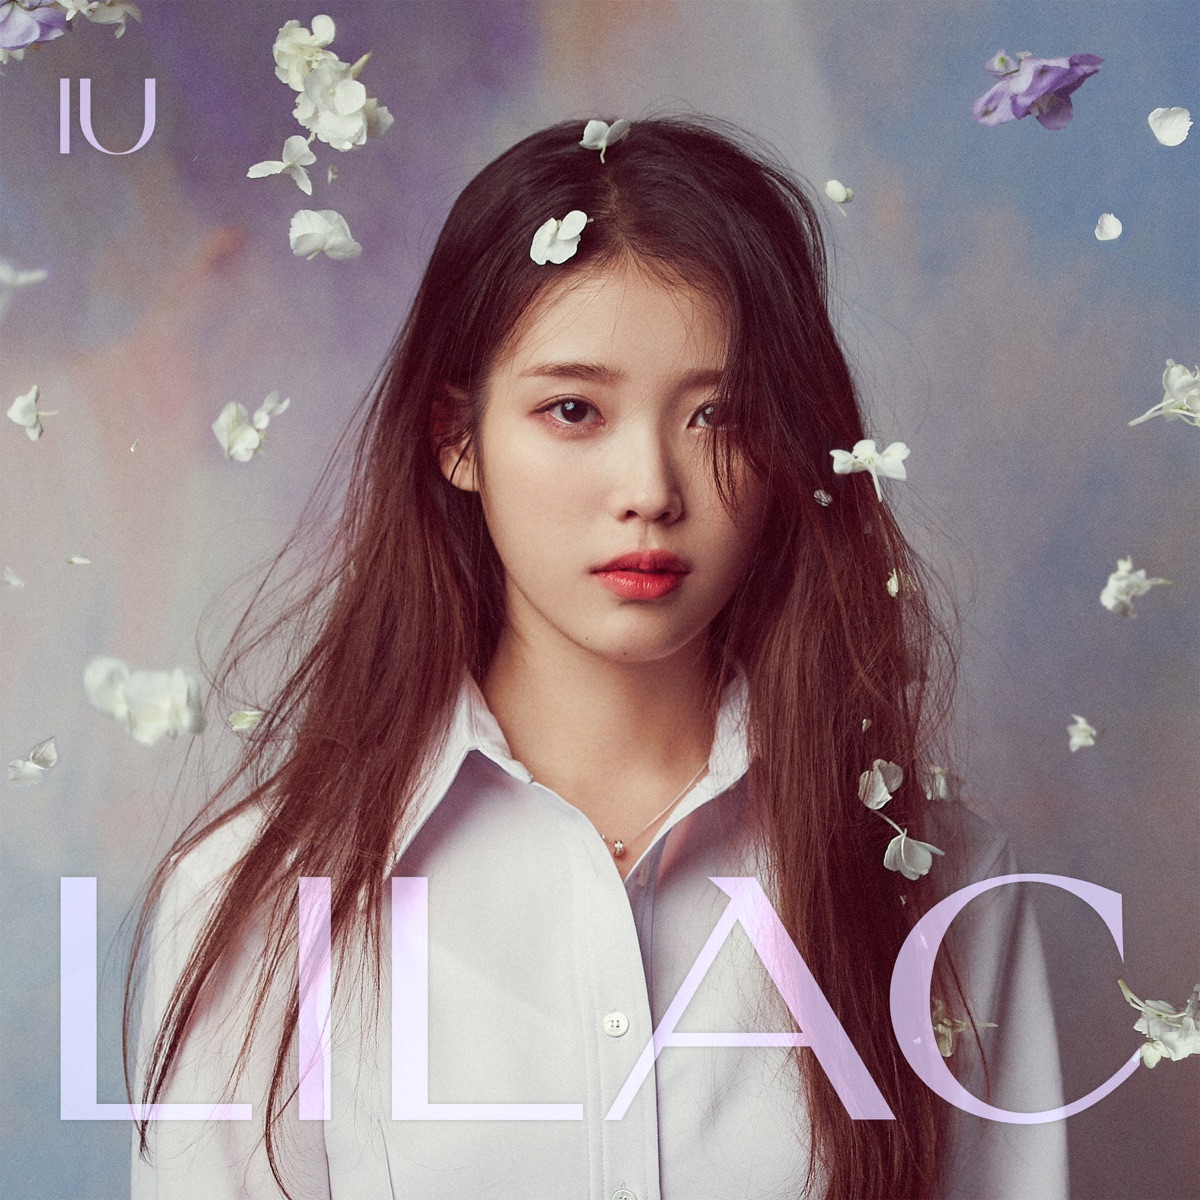 Cover for『IU - Flu』from the release『IU 5th Album 'Lilac'』